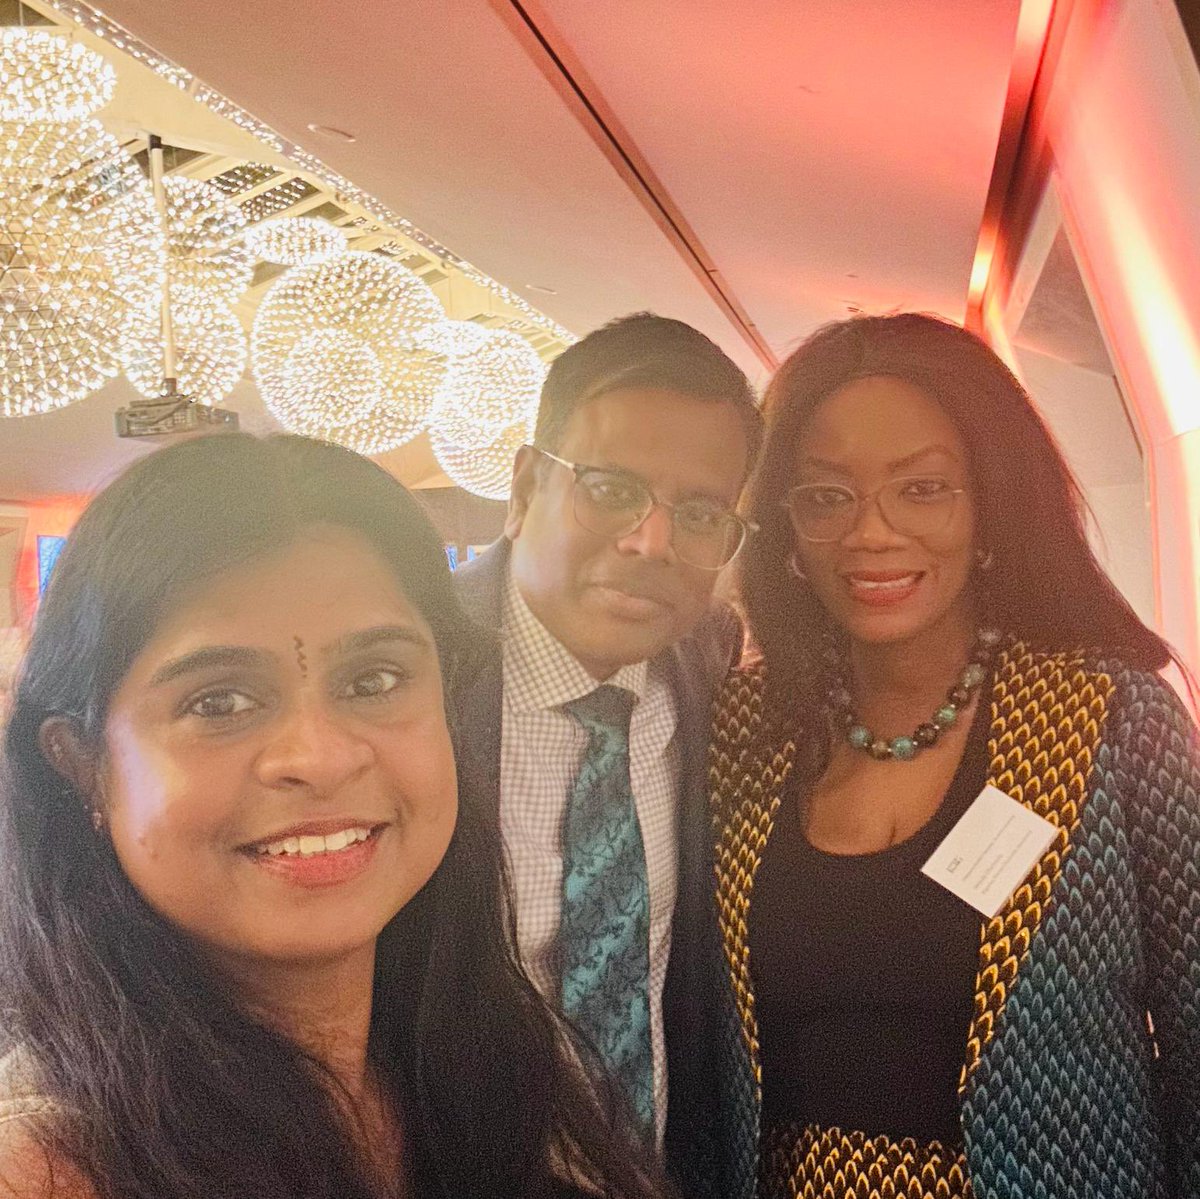 So proud of our @Kokila79swamy spearheading the diaspora engagement with the support of @bensimms65 & @CNOWales to engage with diaspora communities on @THETlinks Experts In Our Midst Programme Nice to see such an impact in African continent. Thank you @bensimms65